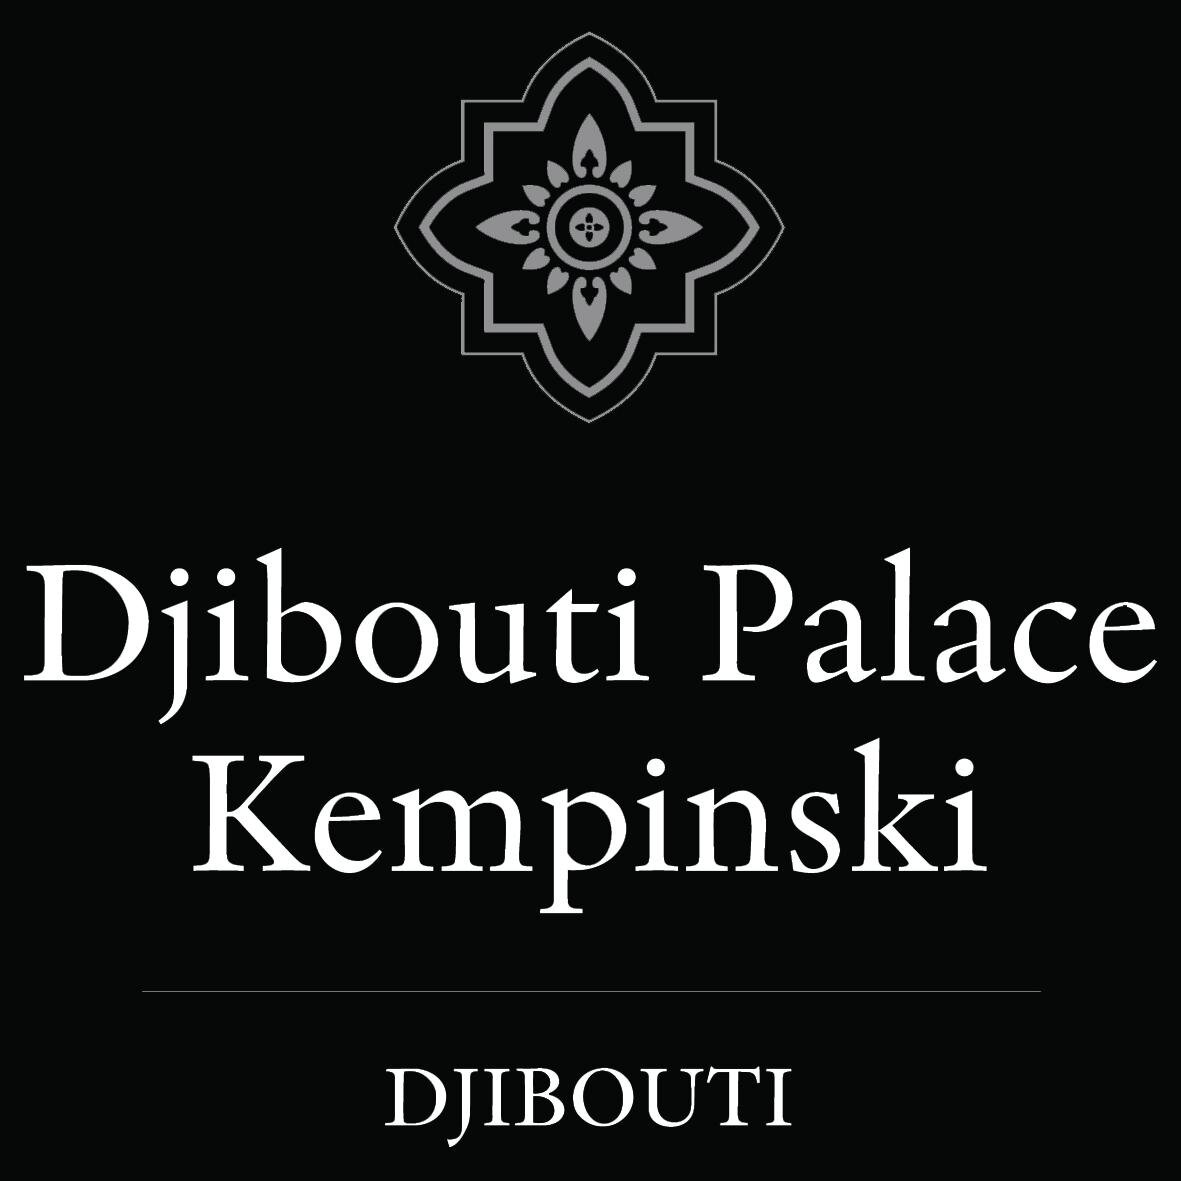 Welcome to the Djibouti Palace Kempinski, the ultimate luxury experience in Africa. Come visit our elegant five-star hotel in Djibouti.